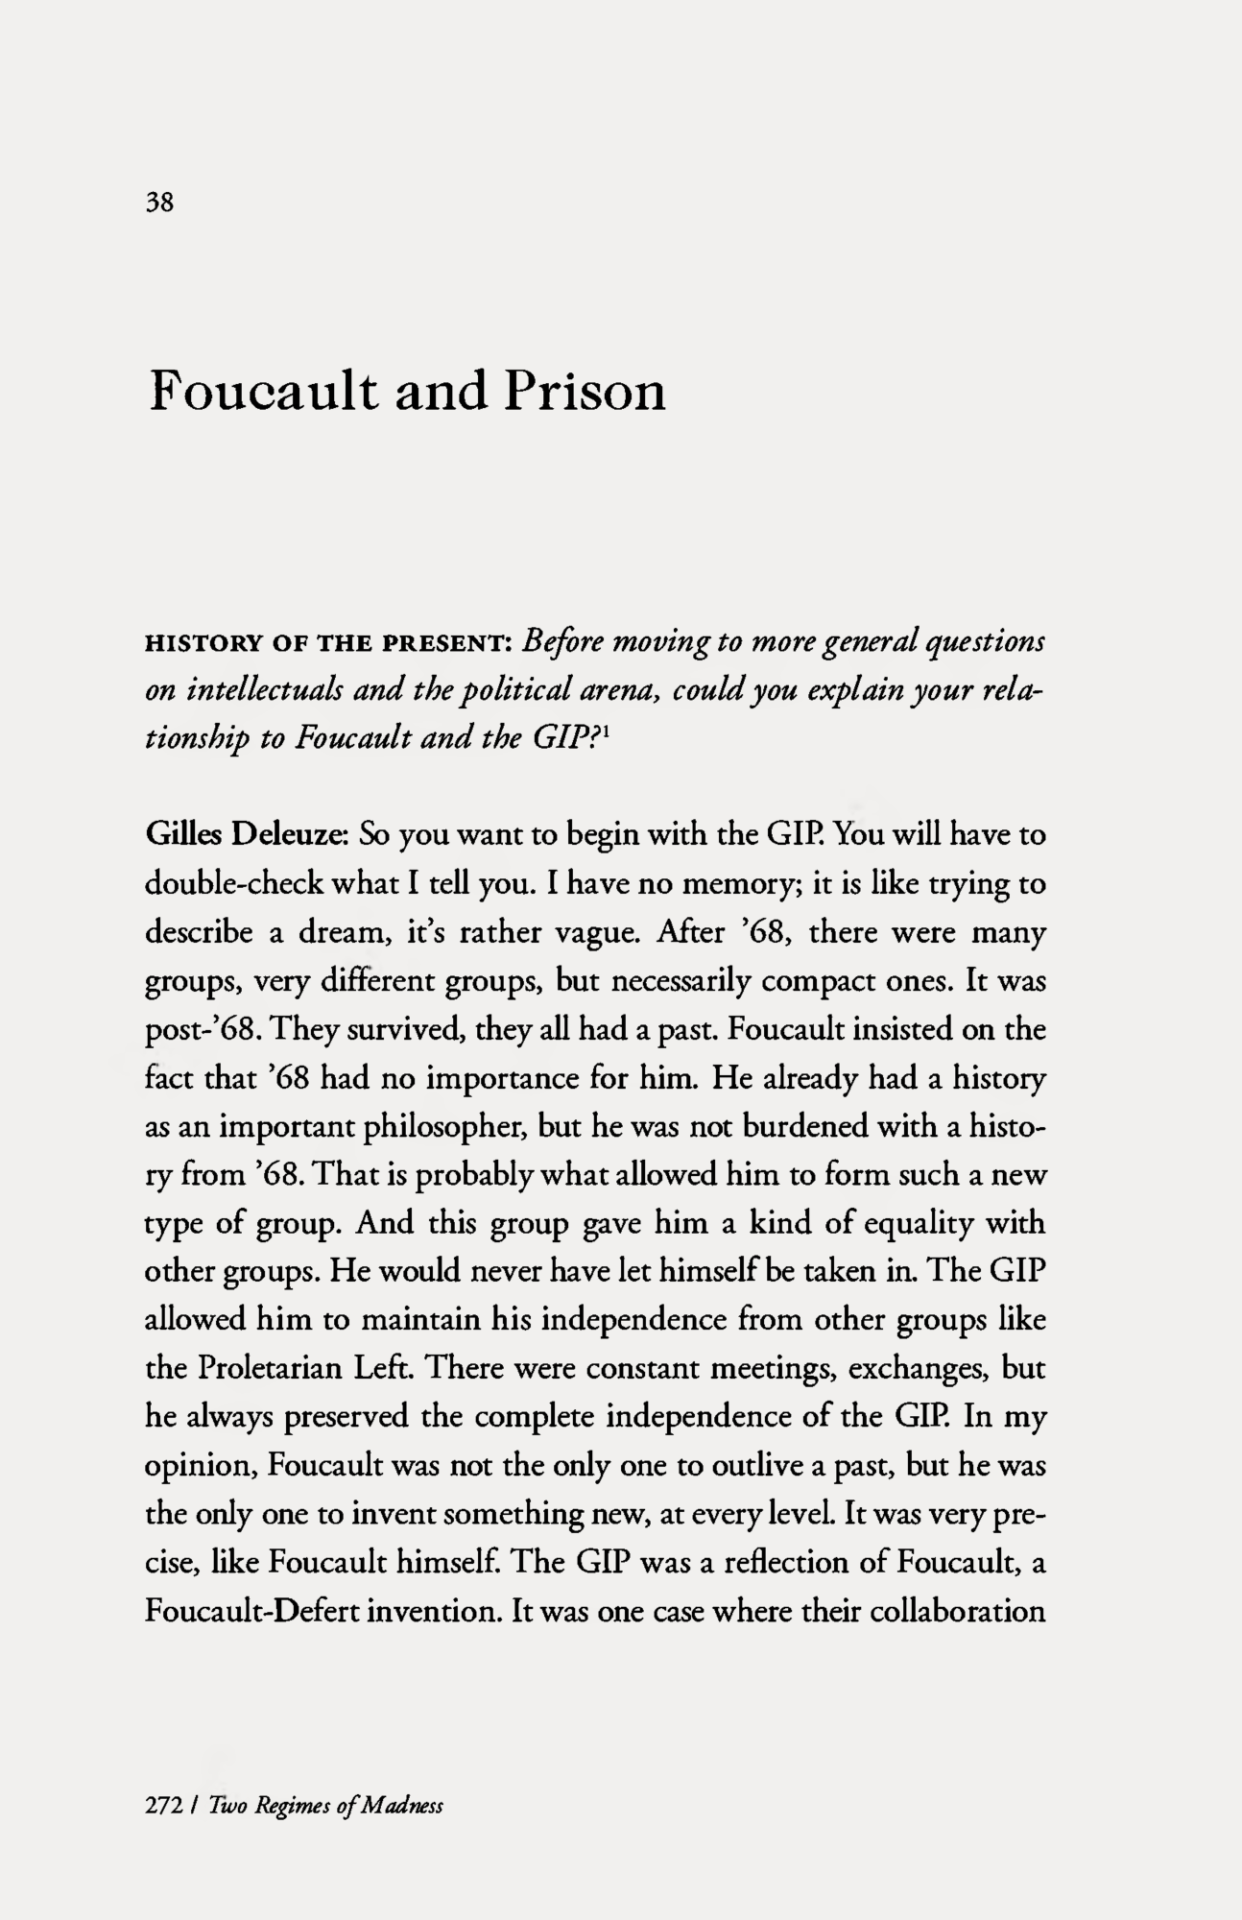 Gilles Deleuze, Foucault and Prison, in Two Regimes of Madness. Texts and Interviews 1975-1995, Edited by David Lapoujade, Translated by Ames Hodges and Mike Taormina, Semiotext(e), Columbia University, New York, NY, 2006, pp. 272-281Note
«Editors title. The text initially appeared with the title The Intellectual and Politics: Foucault and the Prison’, an interview by Paul Rabinow and Keith Gandal for History of the Present, 2, Spring 1986, p. 1-2, 20-21. Eng trans, Paul Rabinow. The version presented here was established from the transcription of the original recordings and sometimes differs from the [first] American presentation.» – p. 407 #graphic design#philosophy#book#gilles deleuze#michel foucault #le groupe d’information sur les prisons #david lapoujade#ames hodges#mike taormina#semiotext(e)#keith gandal#paul rabinow #history of the present #2000s